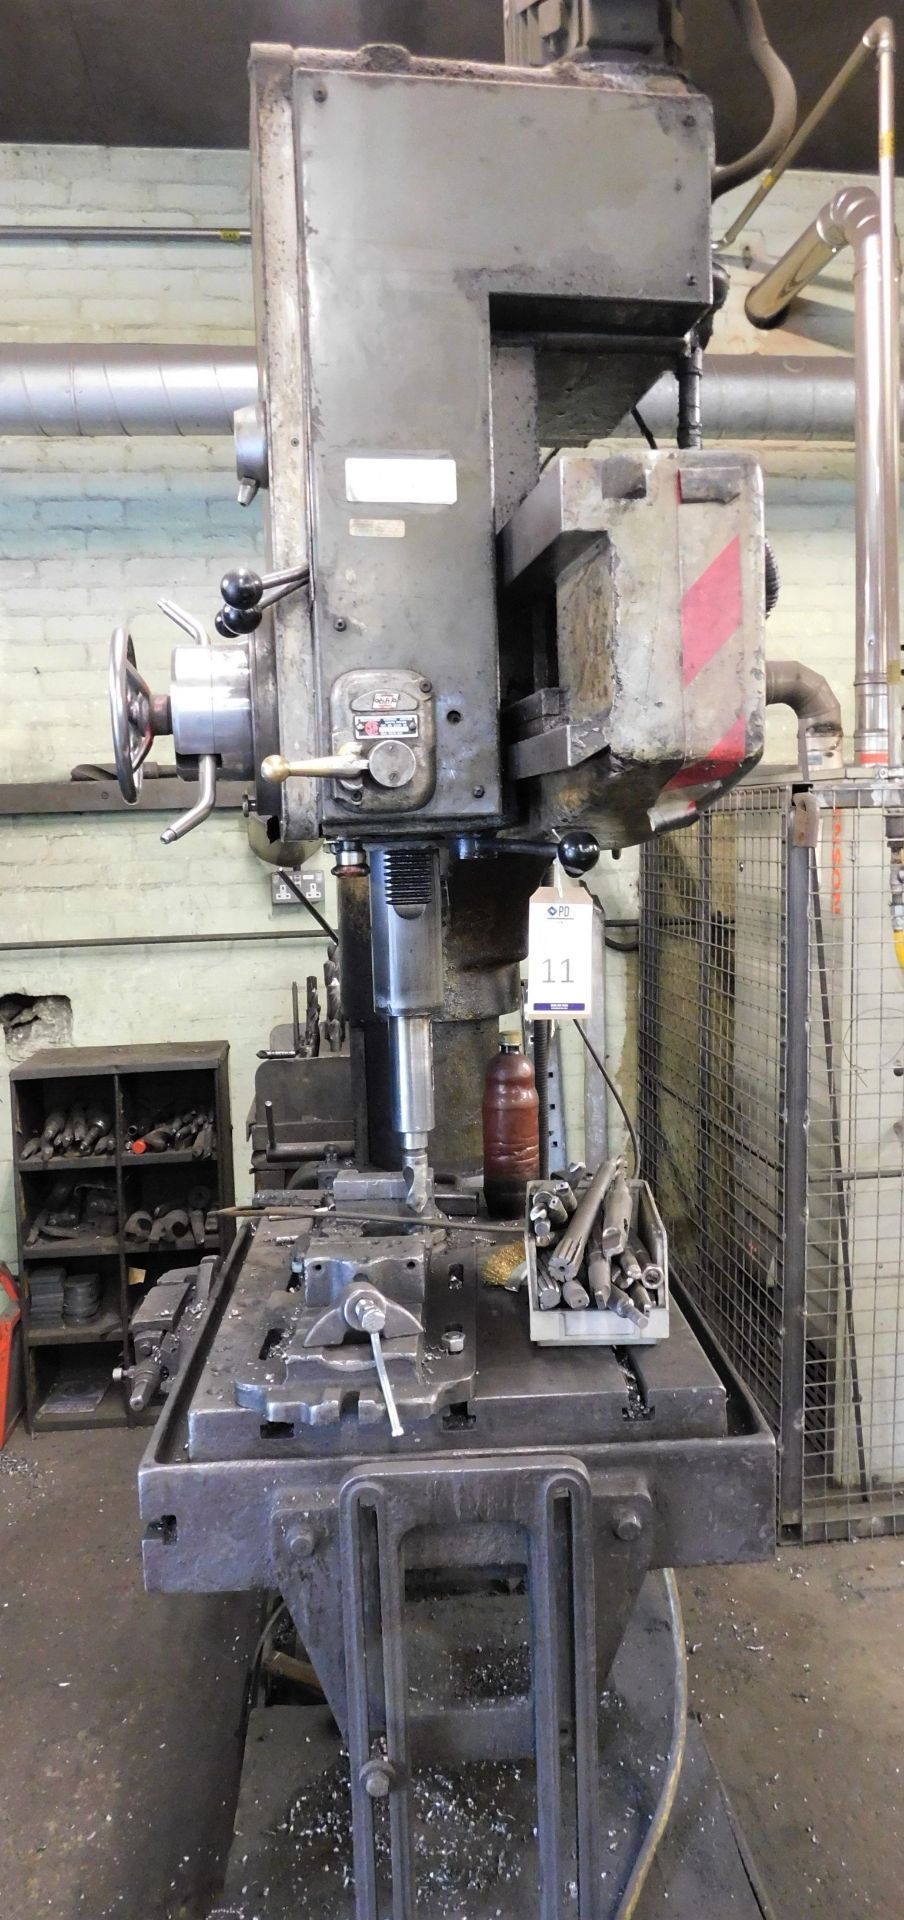 Qualters & Smith R3 Heavy Duty Radial Arm Drill with T-Slotted Table fitted machine Vice, Roller